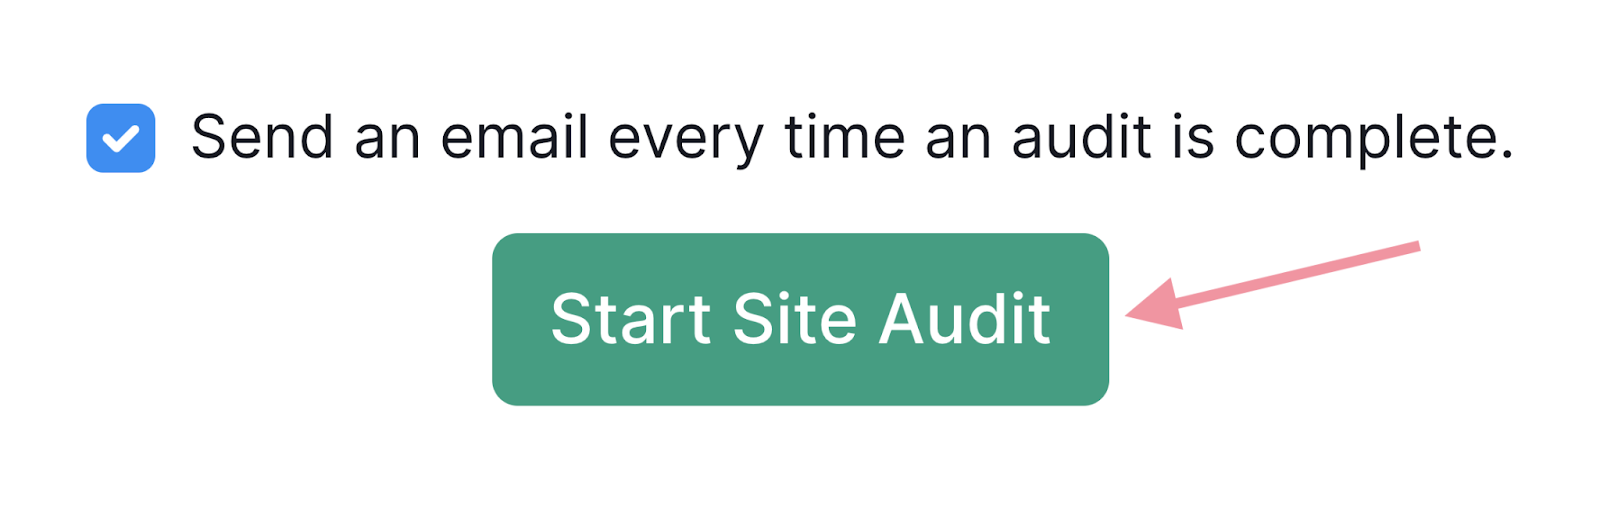 starting the site audit